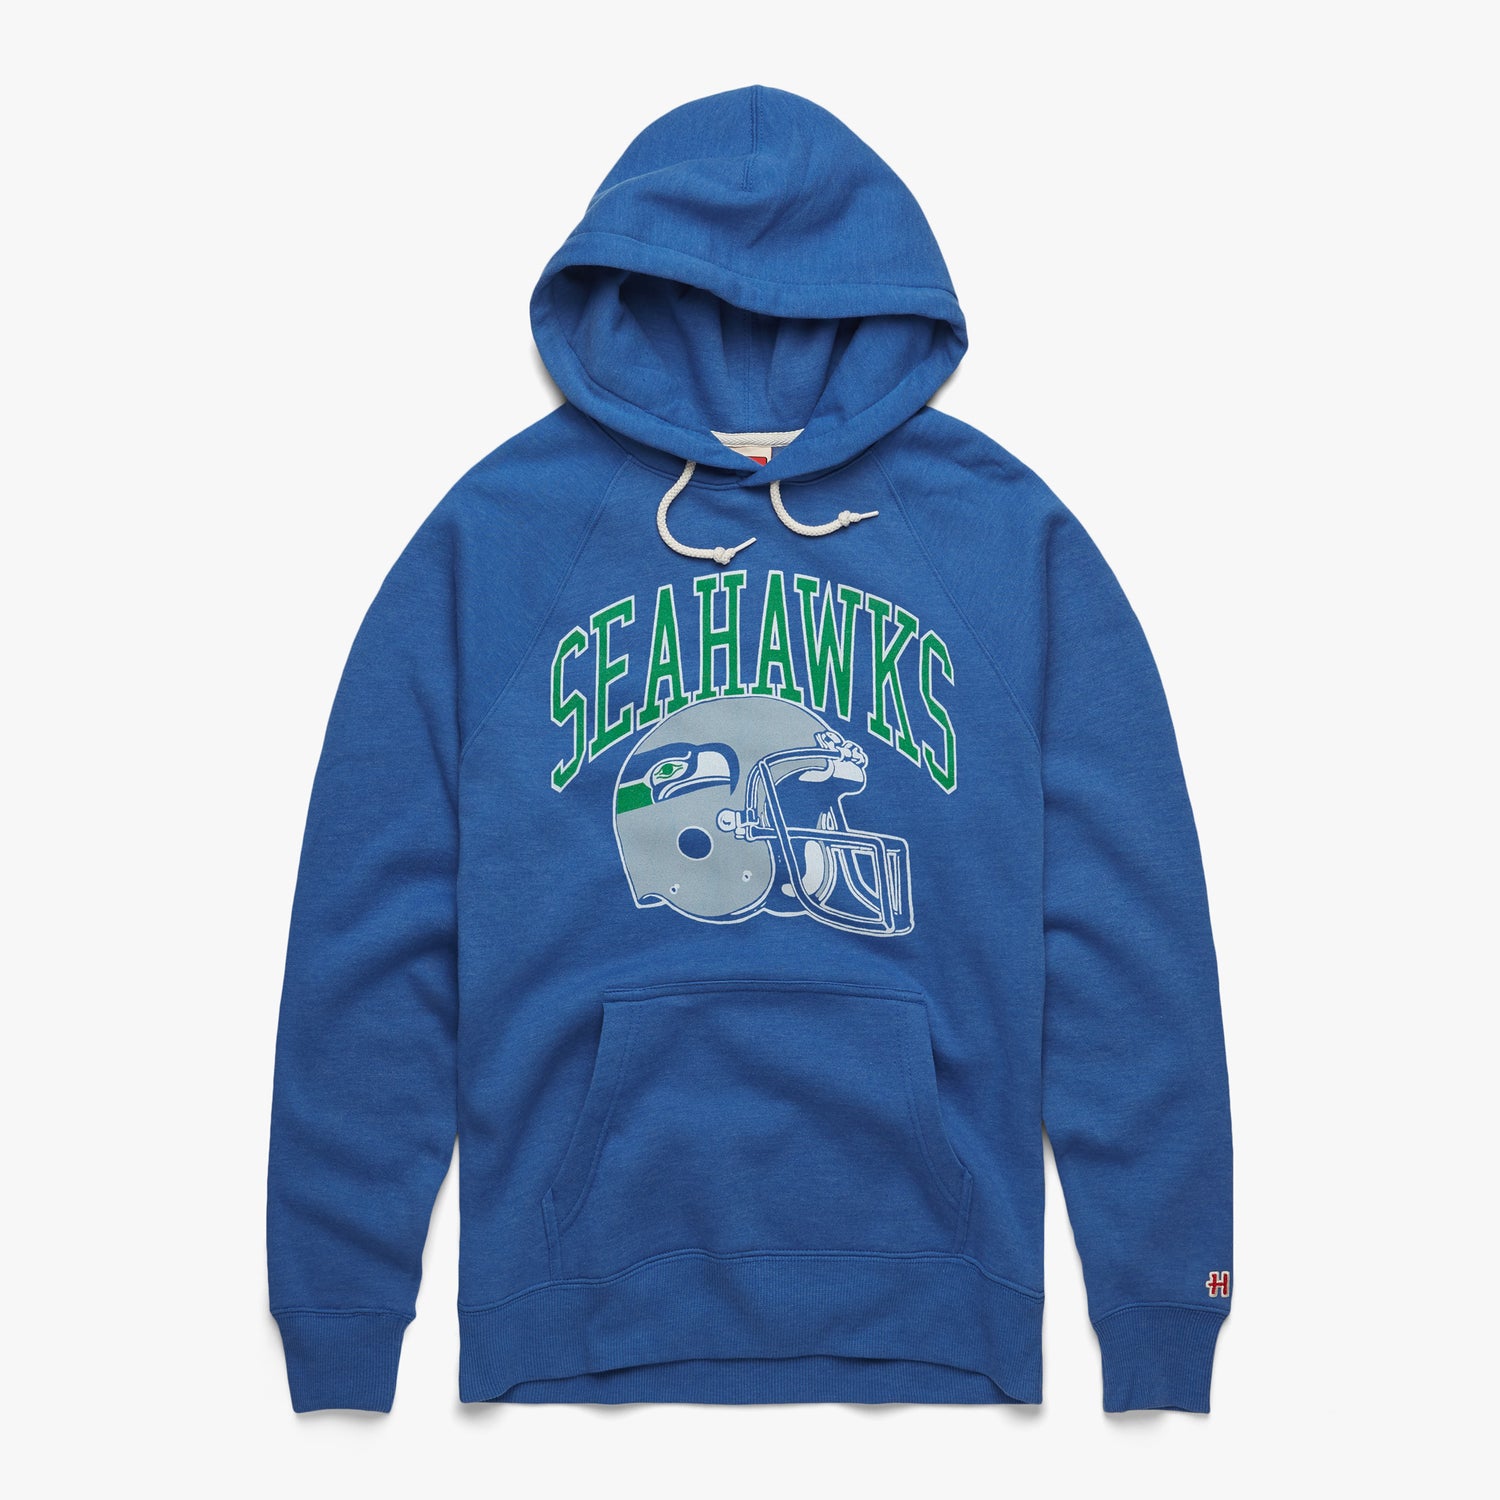 Seattle Seahawks Helmet Retro Hoodie from Homage. | Officially Licensed Vintage NFL Apparel from Homage Pro Shop.